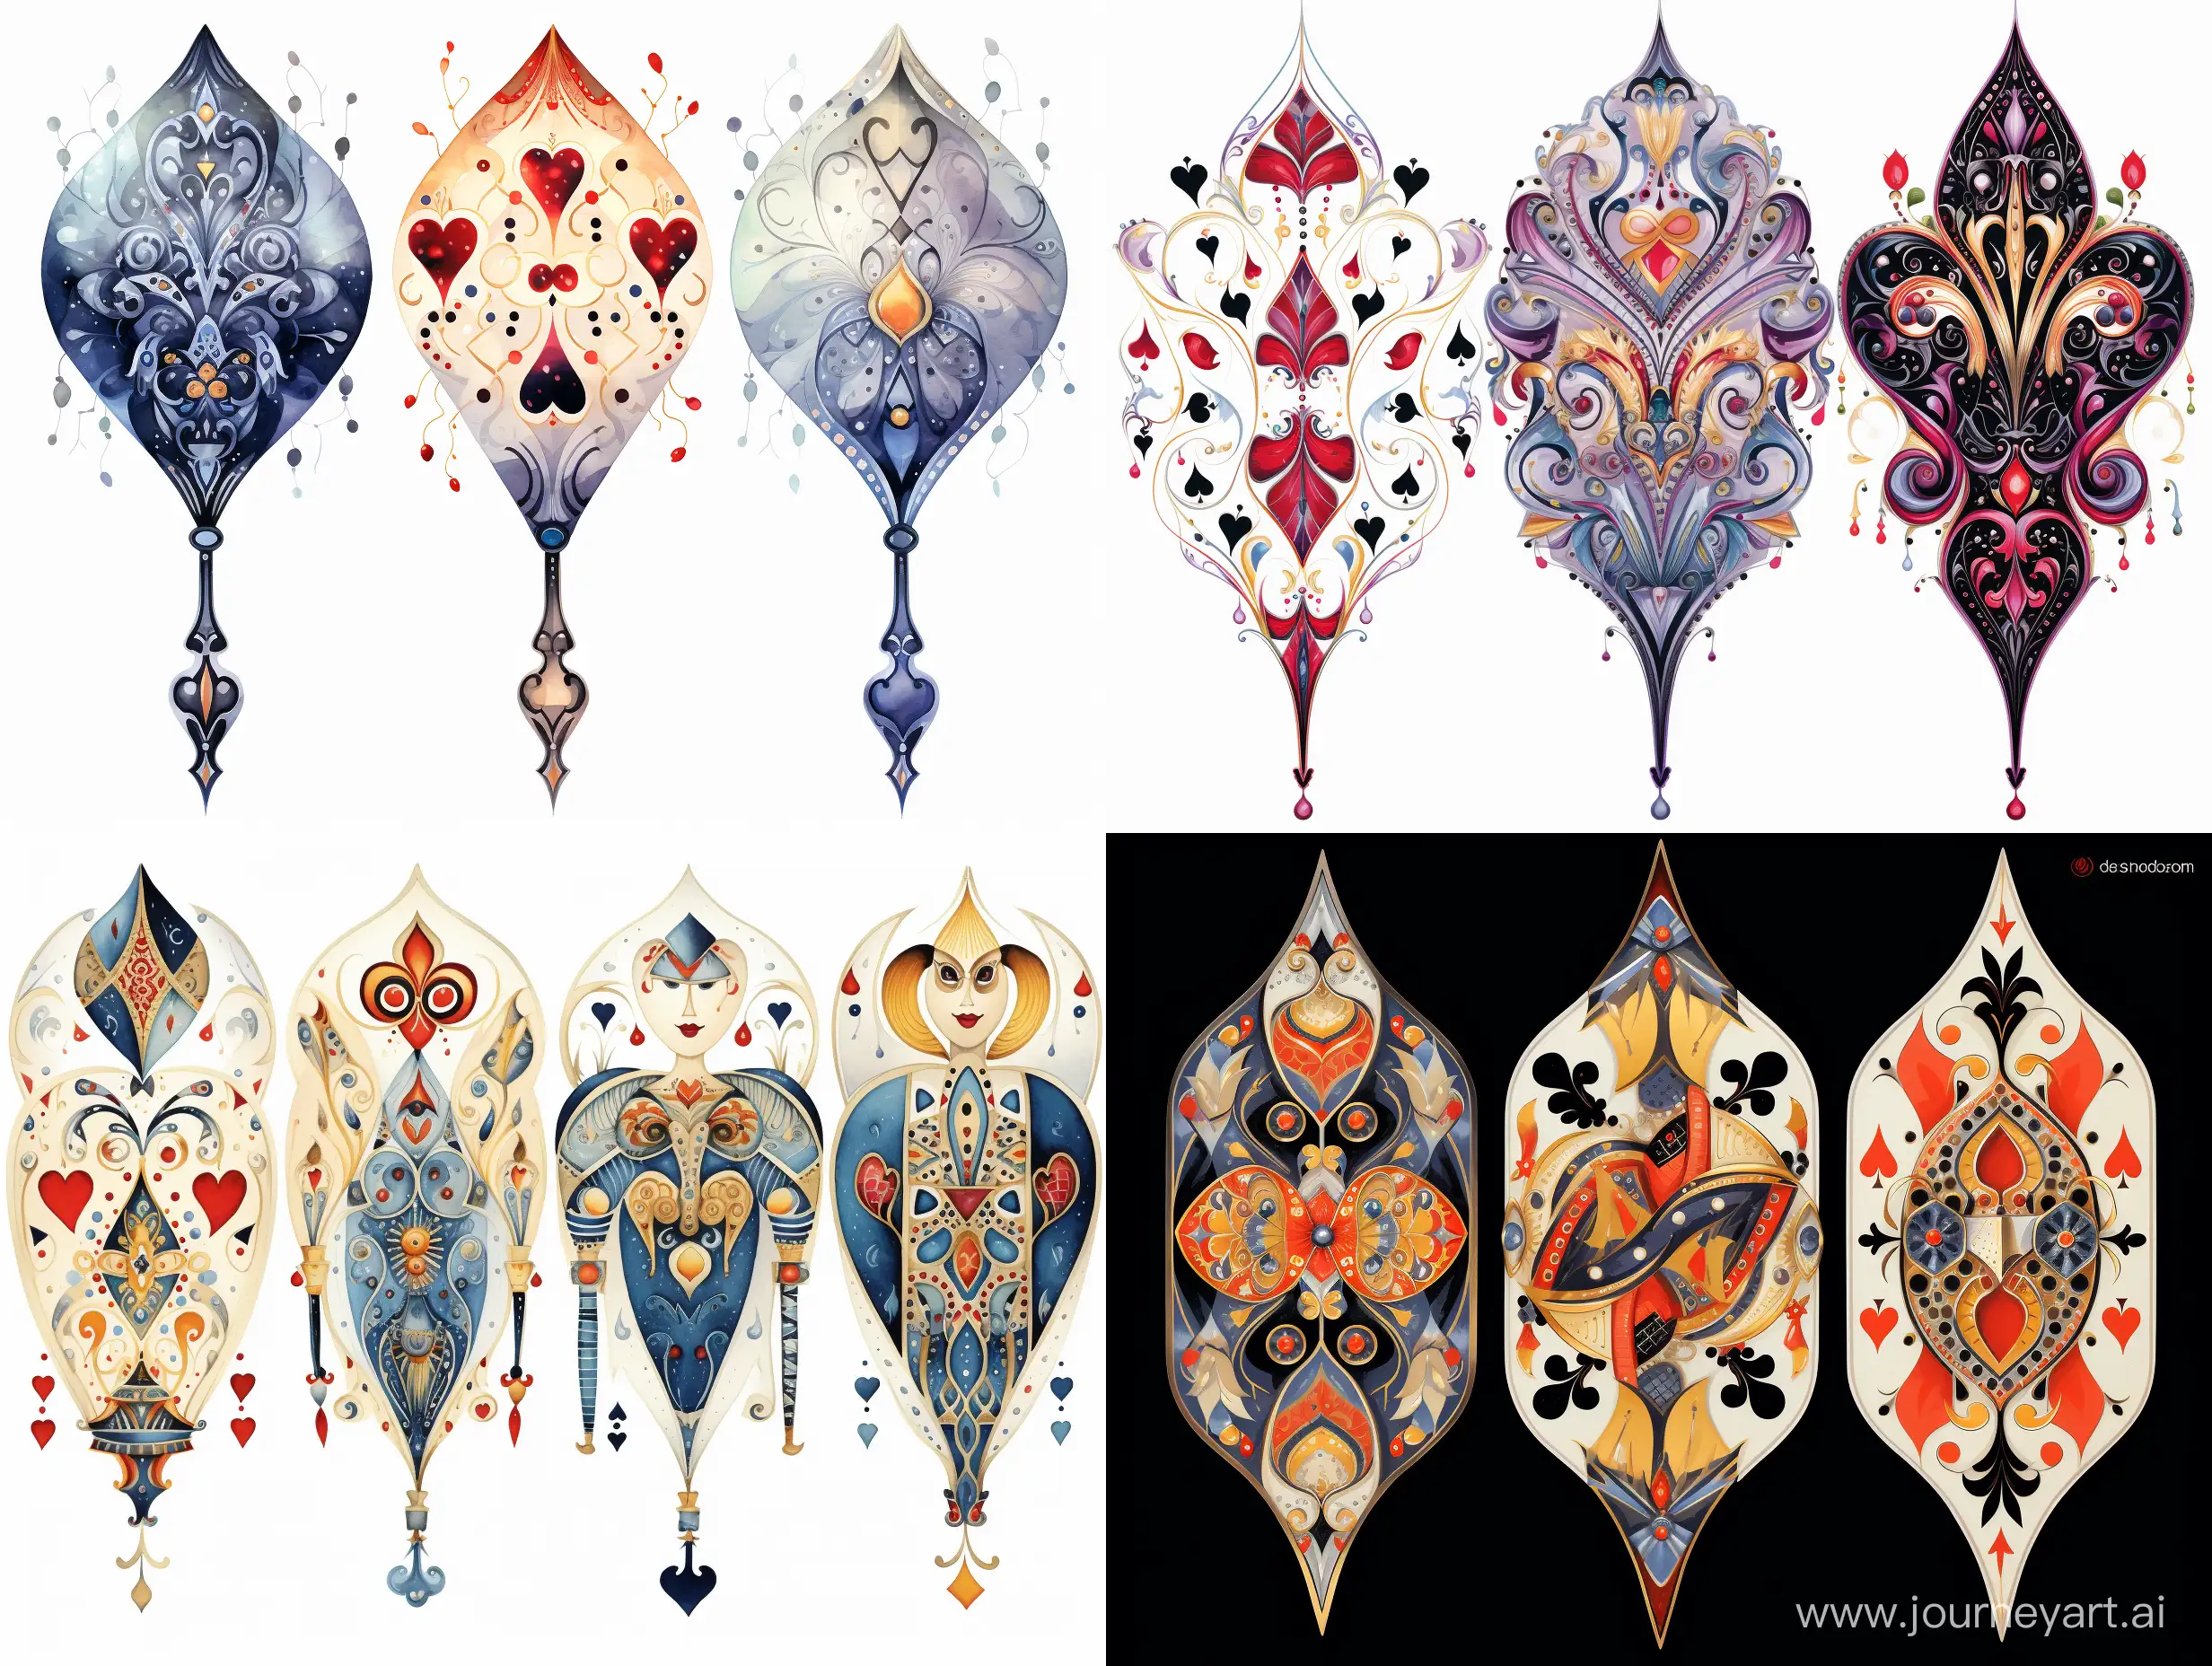 Four variants of the patterned ancient ornament, in the form of suits of spades, clubs, diamonds, hearts, fabulous illustration, stylized caricature, Victor Ngai, watercolor, decorative, flat drawing.